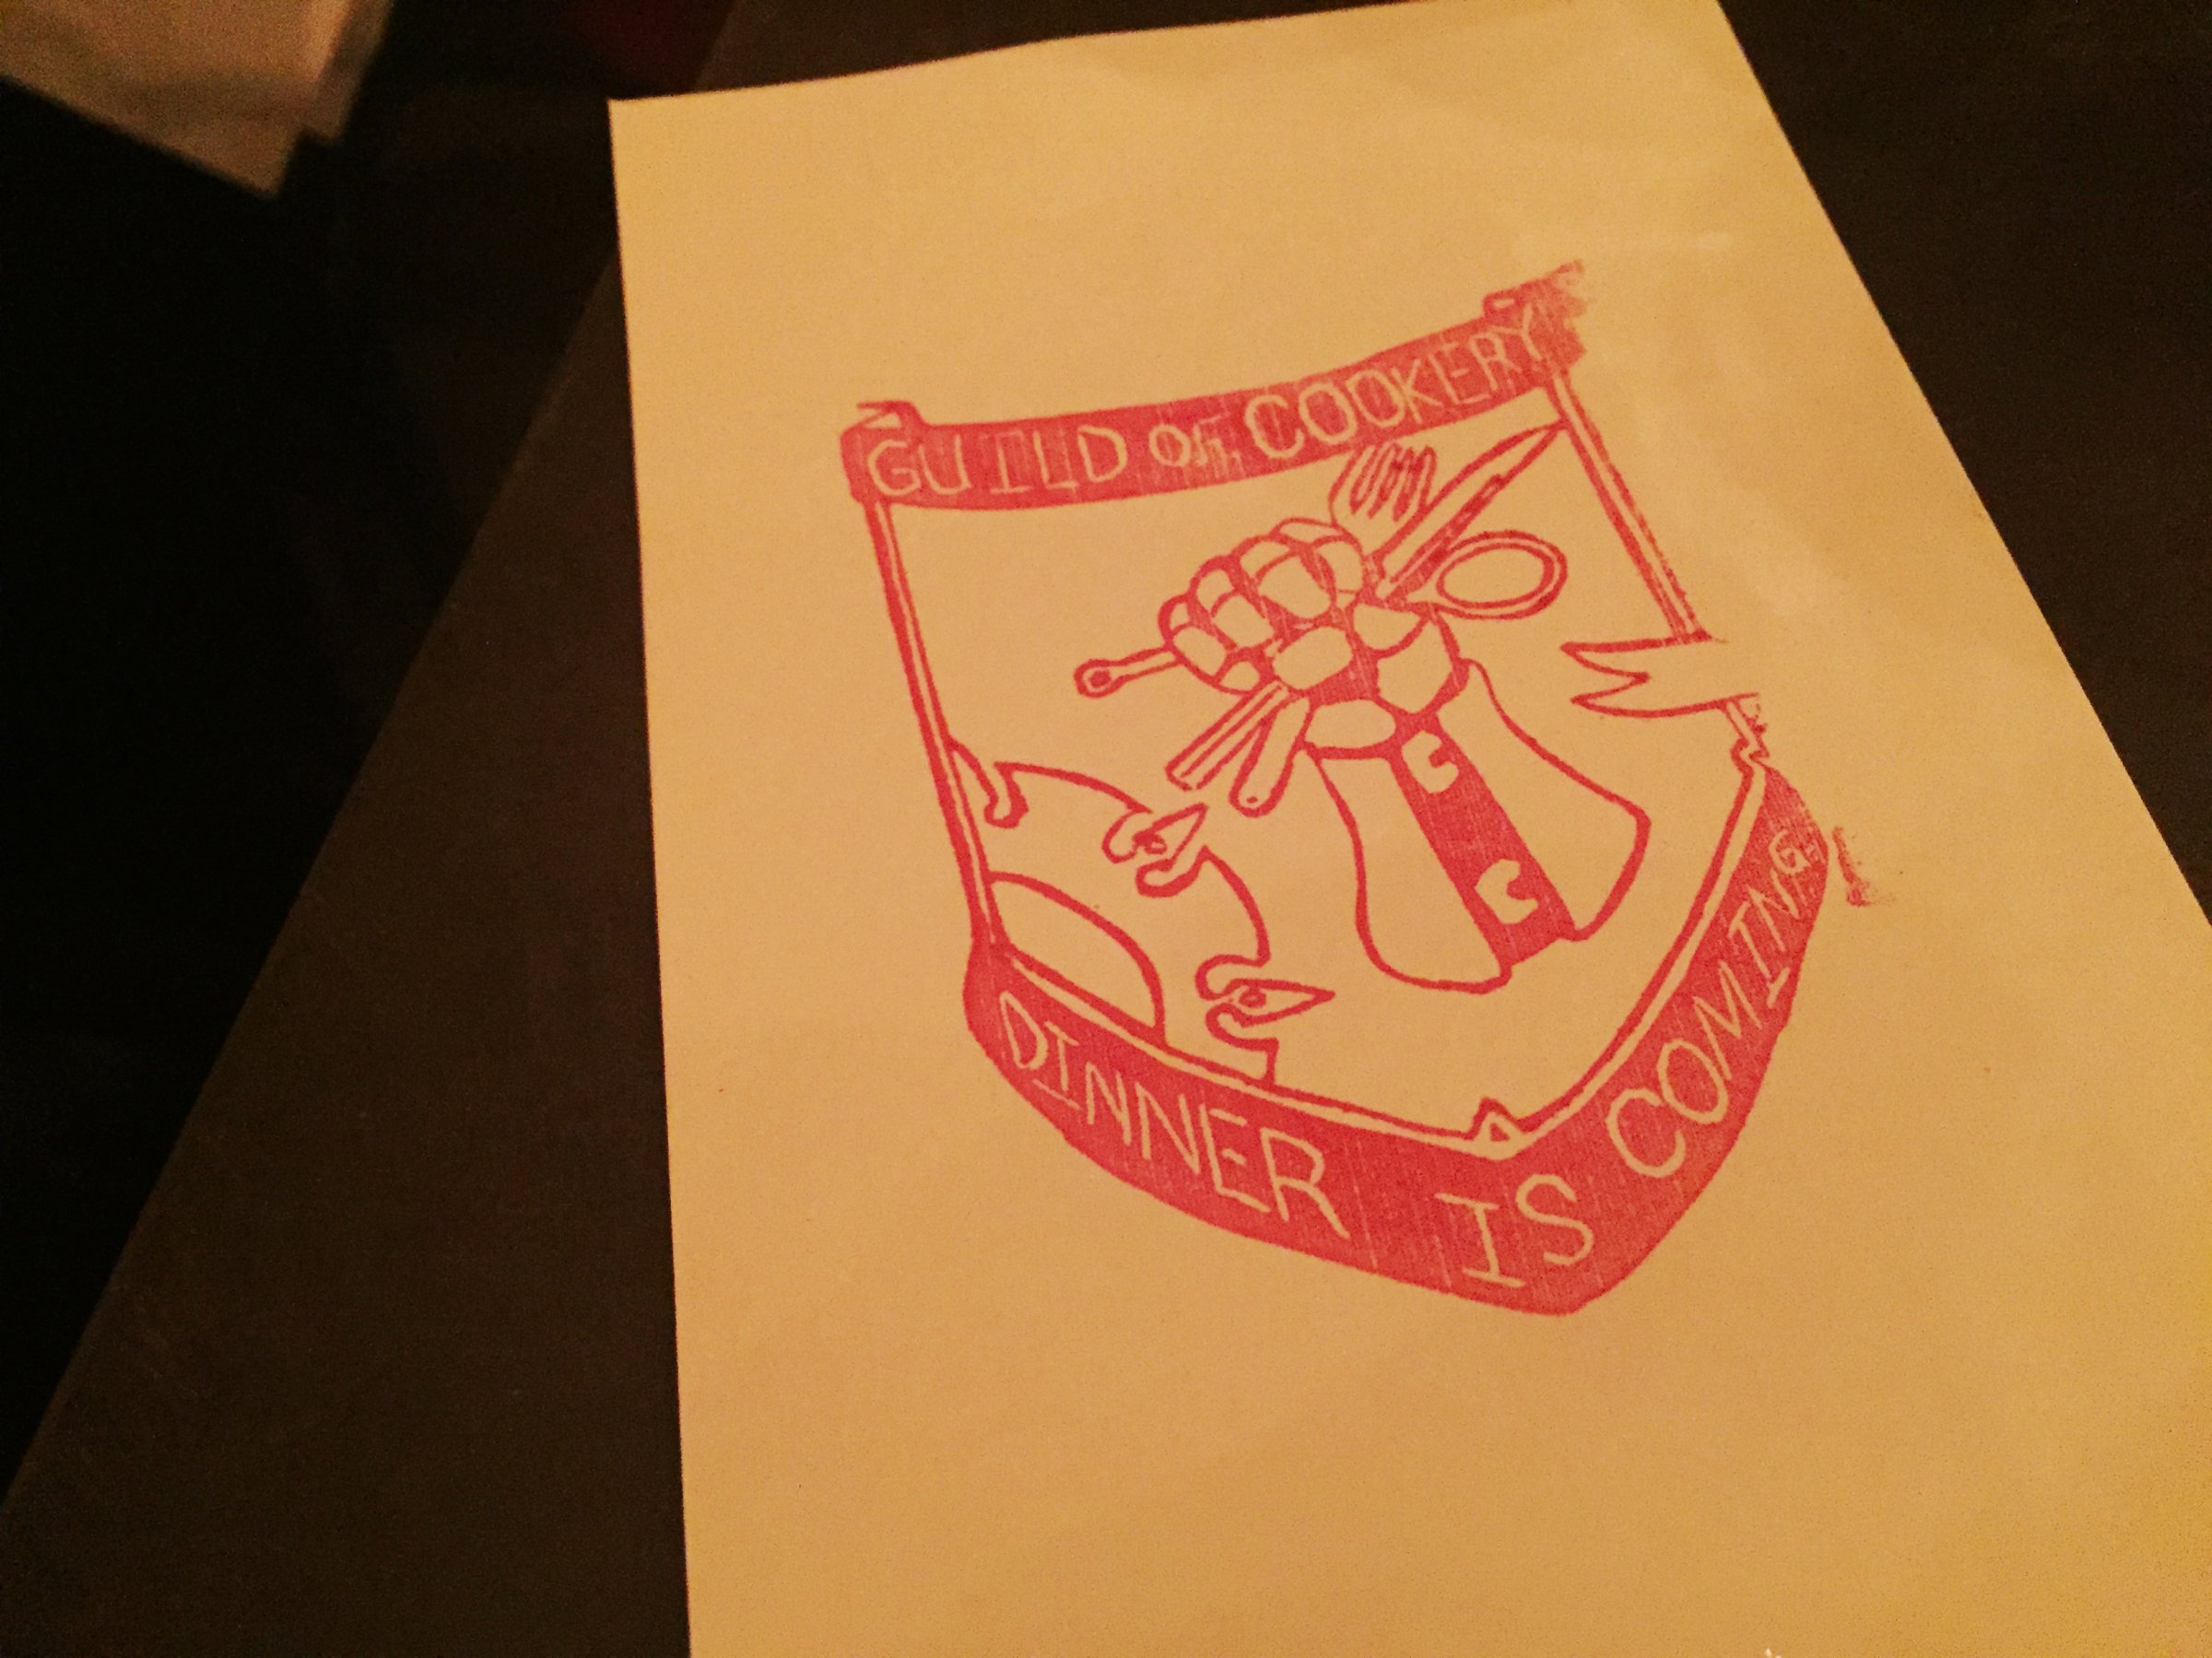 The Guild of Cookery decorates banners and menus with their sigil and house motto.